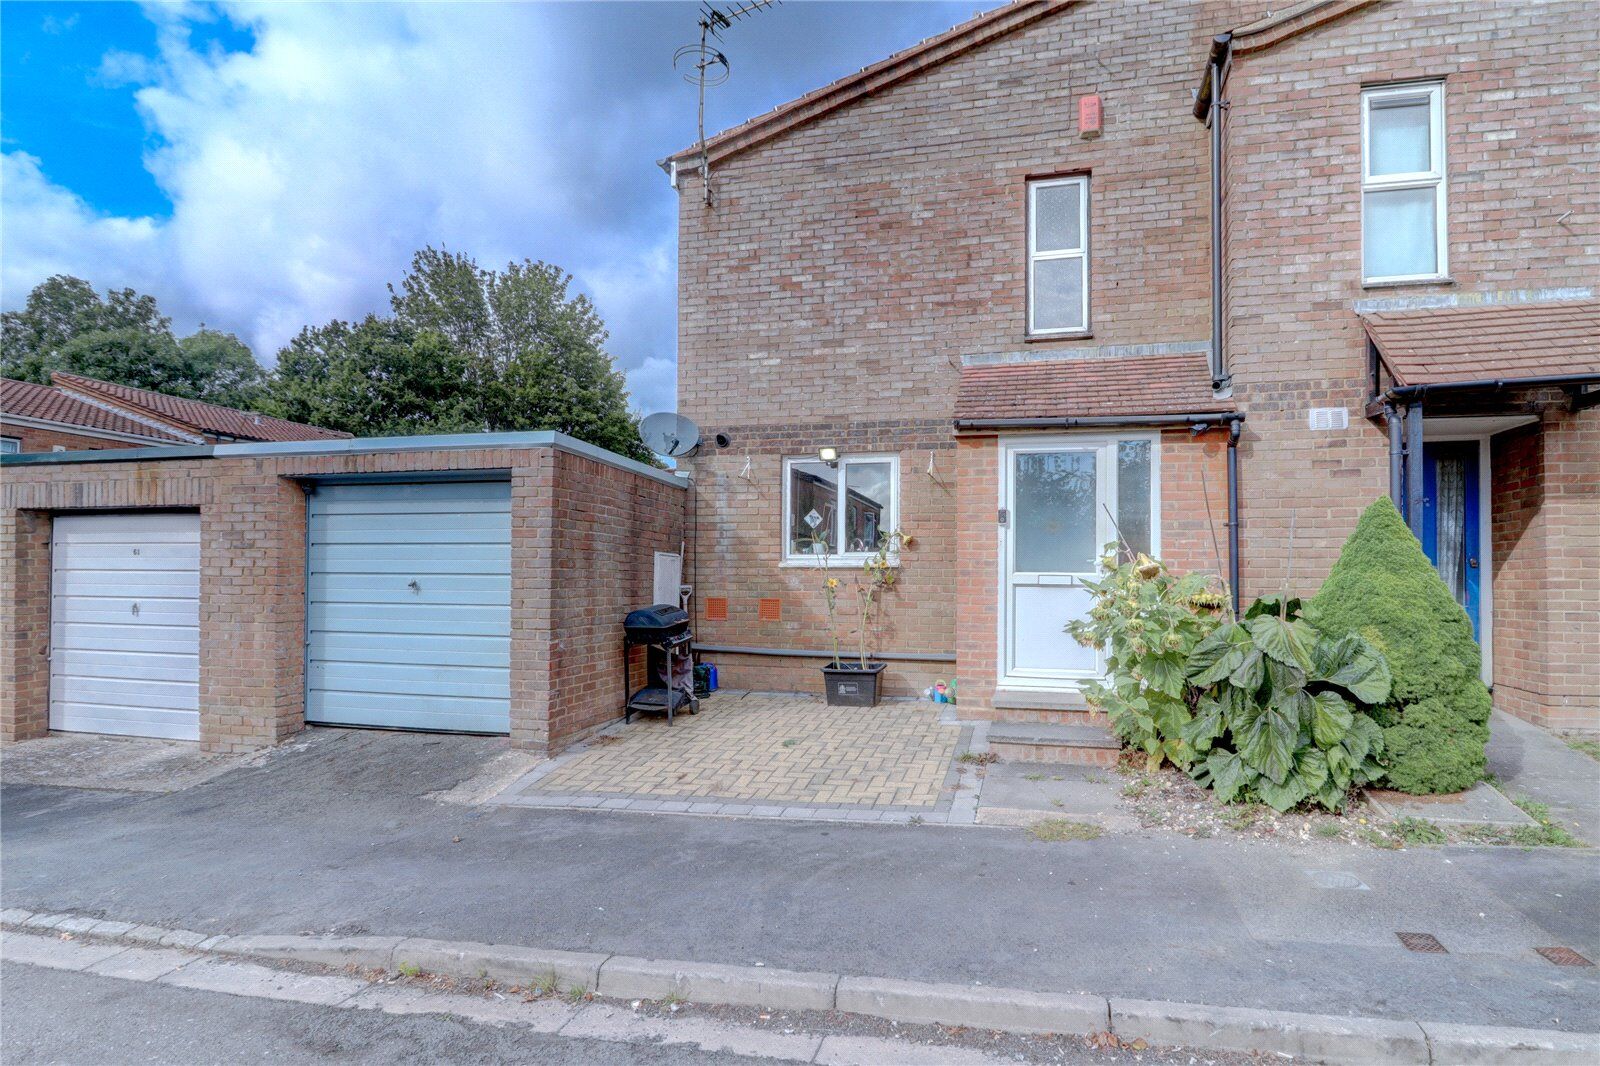 3 bedroom semi detached house for sale Alford Road, High Wycombe, HP12, main image